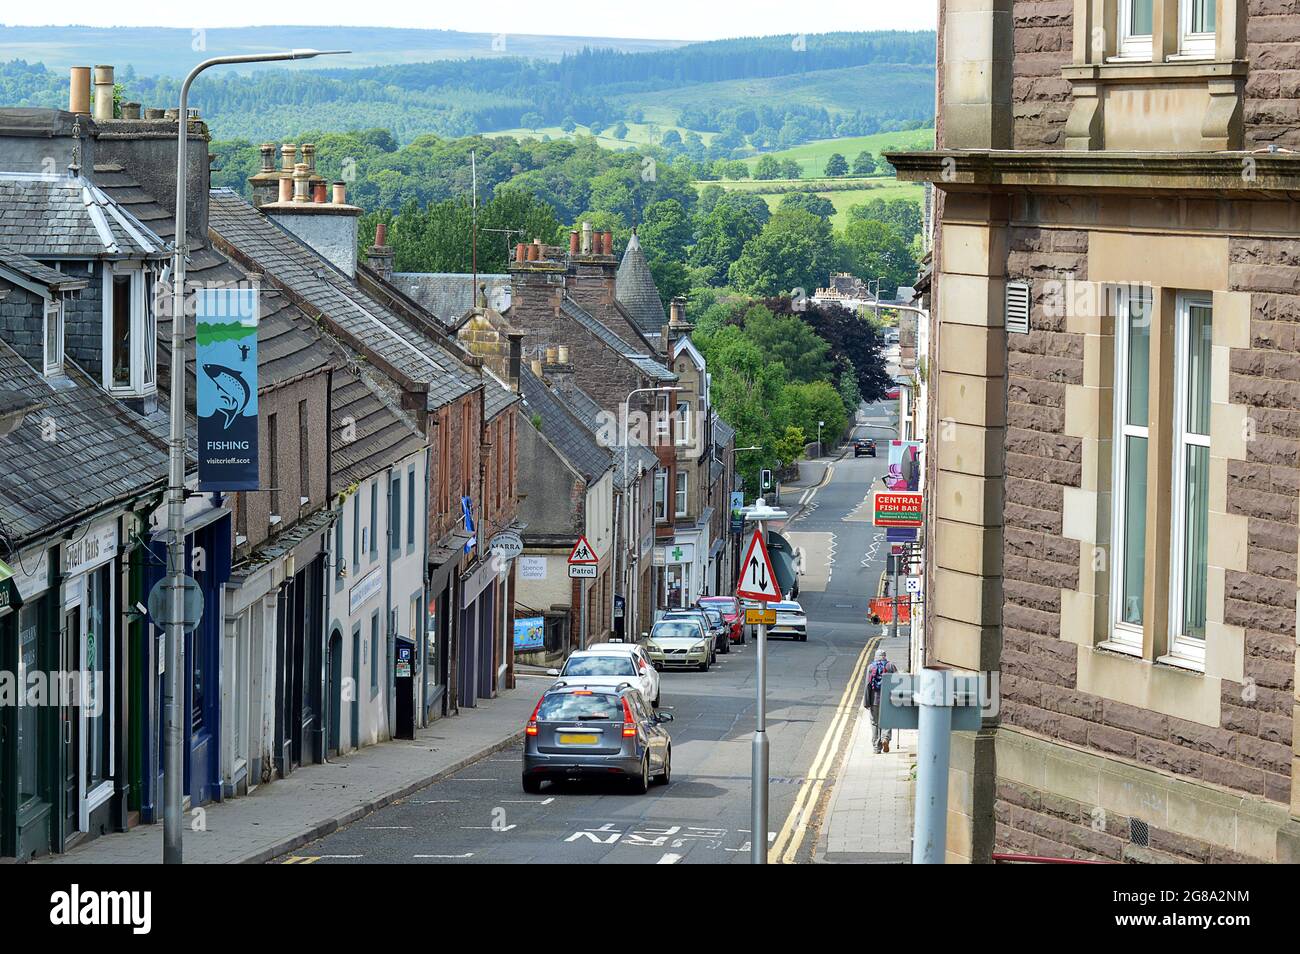 CRIEFF, PERTHSHIRE, SCOTLAND - 21 JUNE 2021: A view down King Street in Crieff, Perthshire, Scotland, past the solid sandstone Burgh Chambers Stock Photo